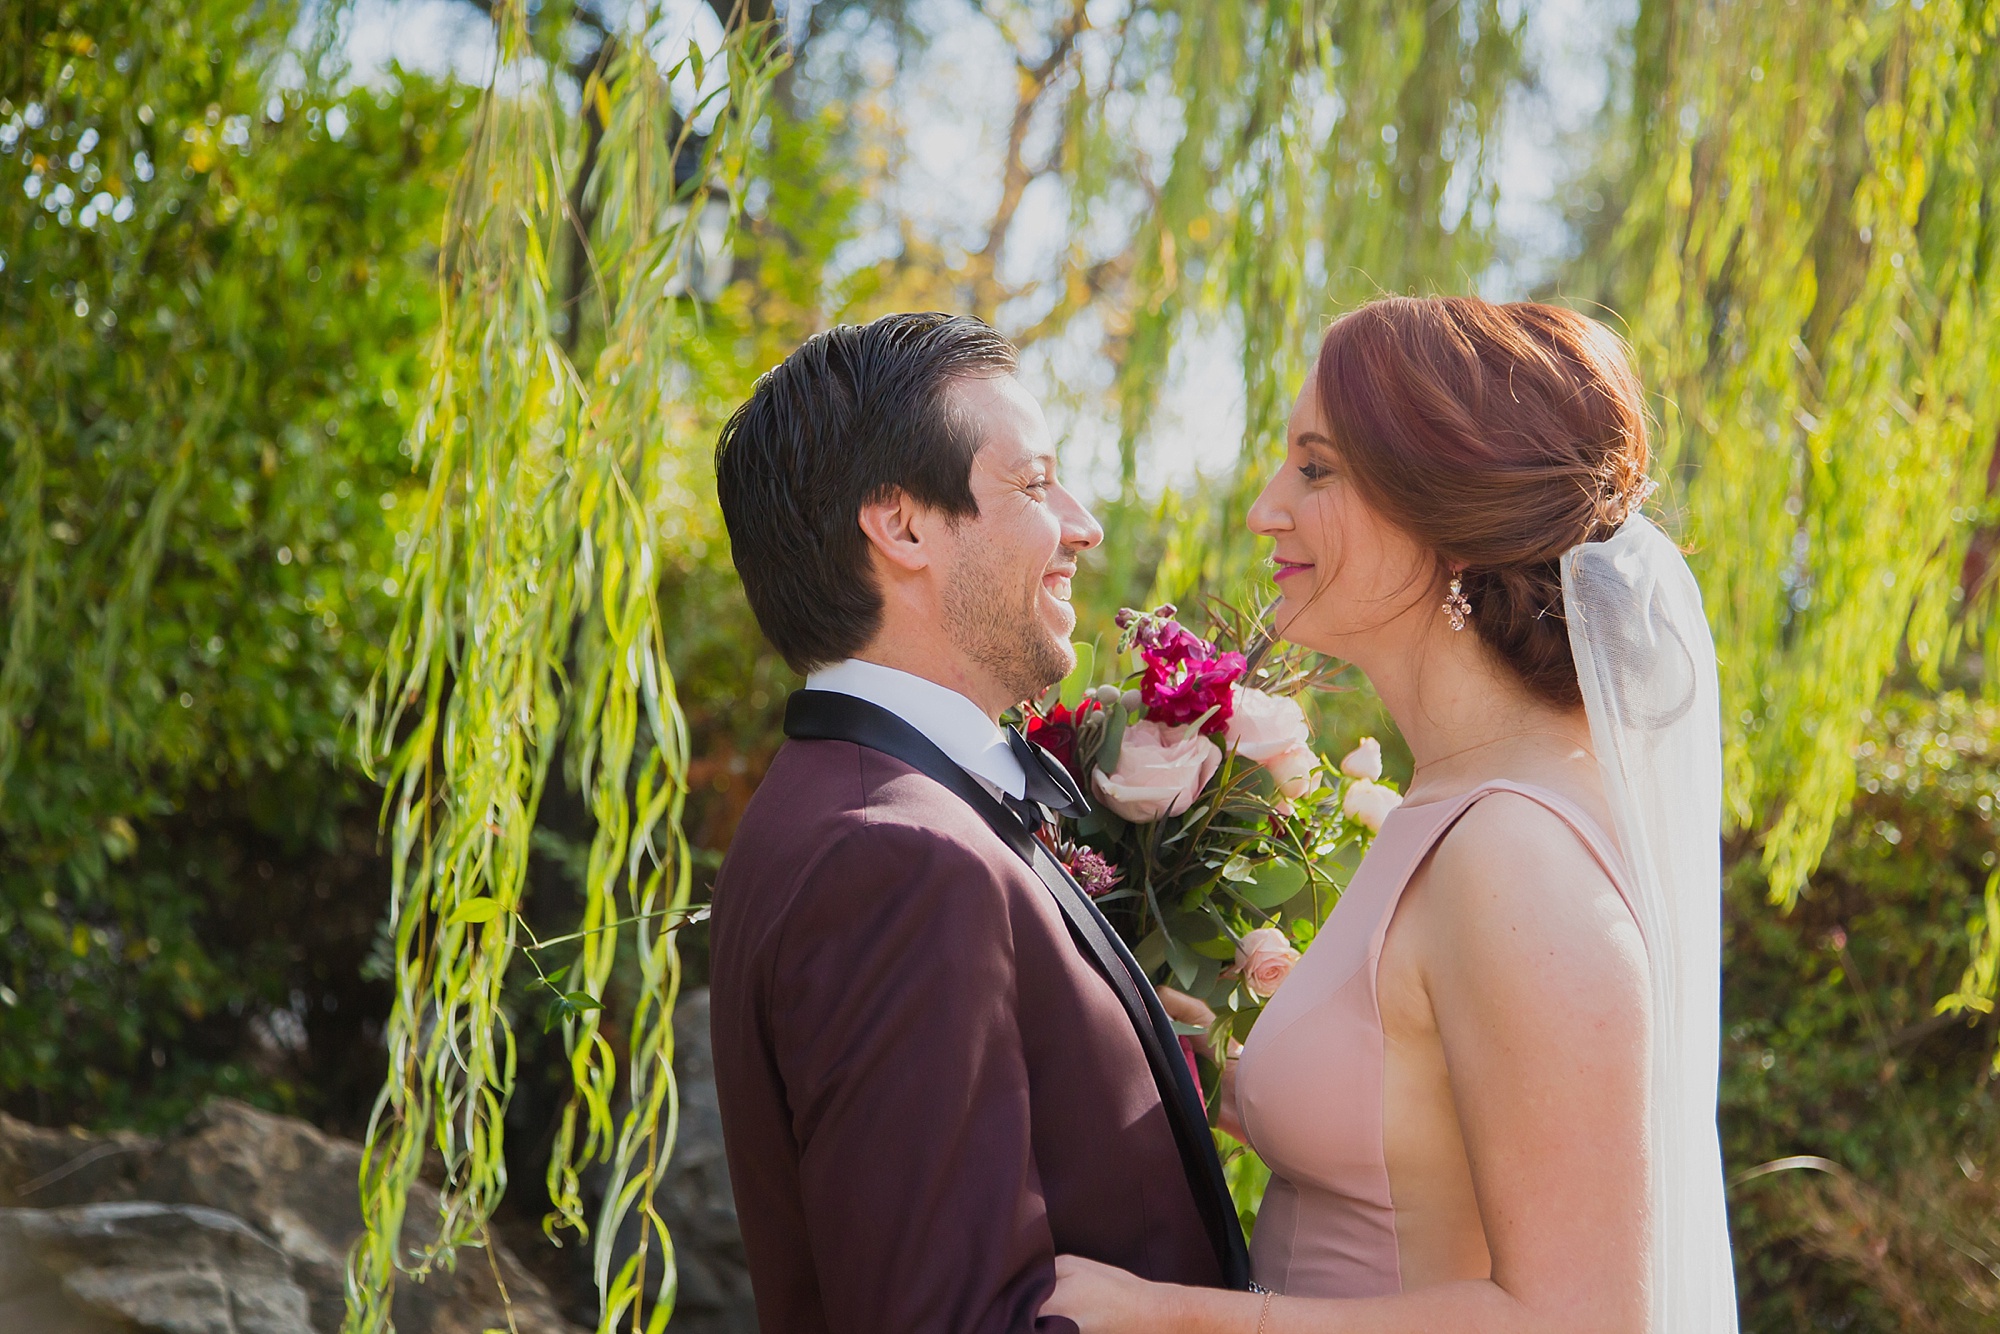 The bride and groom smile at each other while standing under a willow tree.